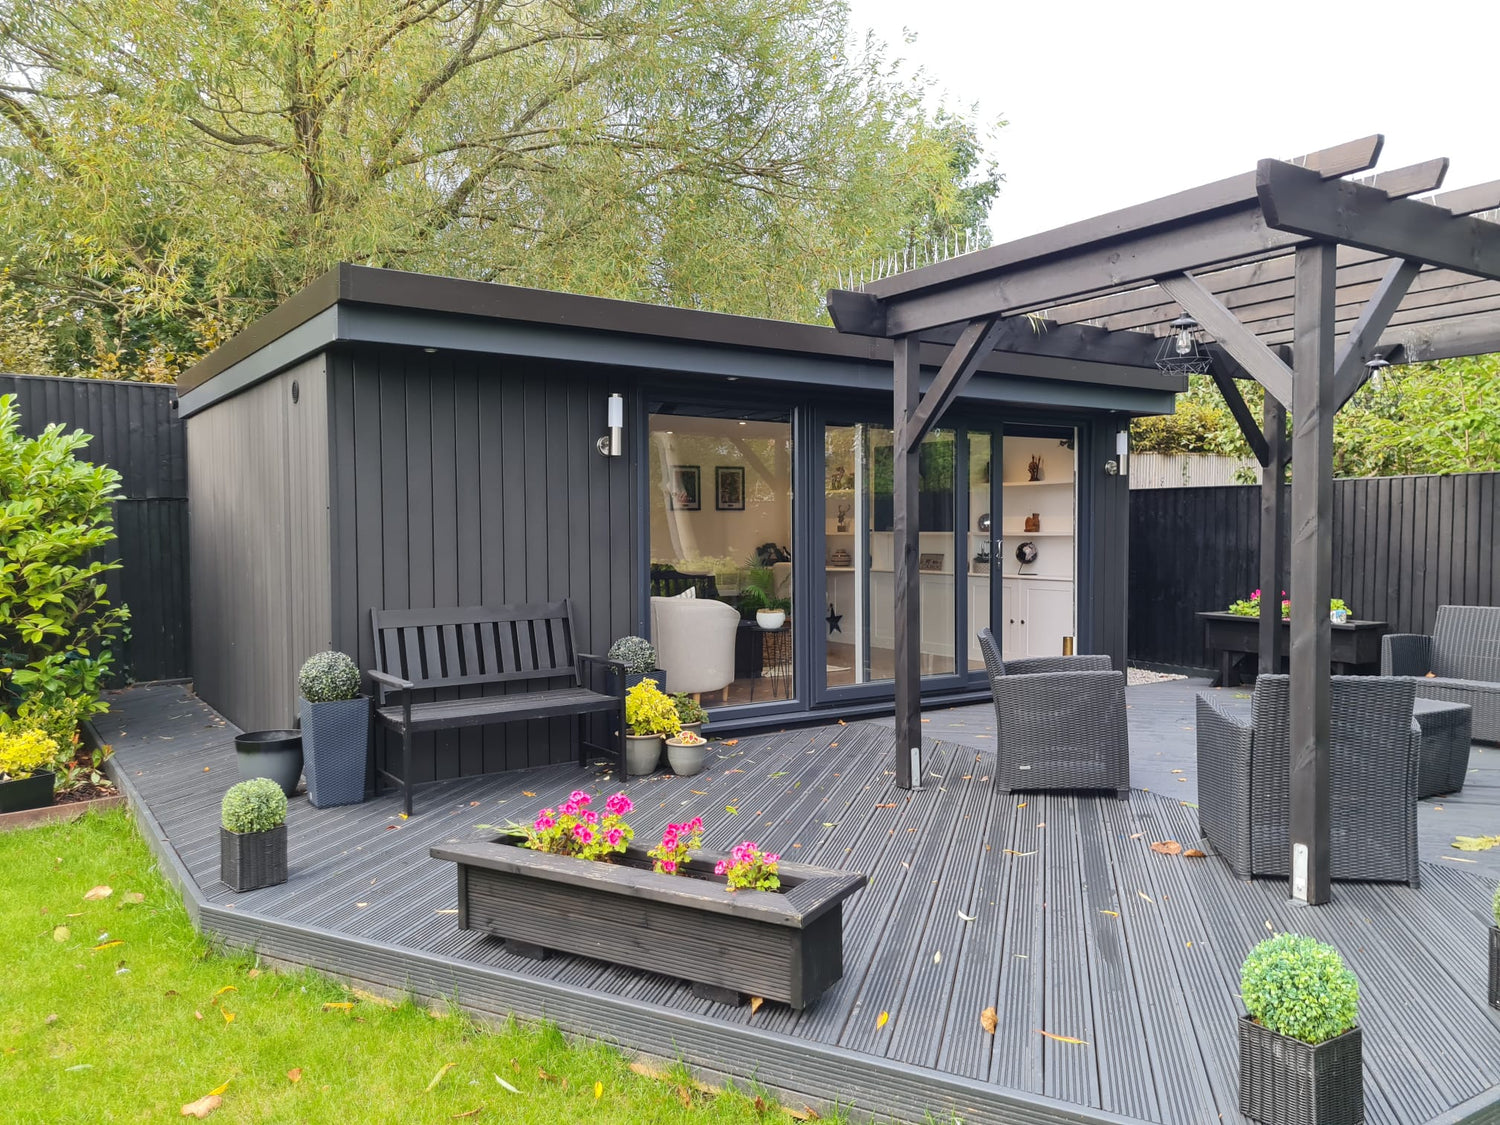 A black garden shed with a wooden deck.